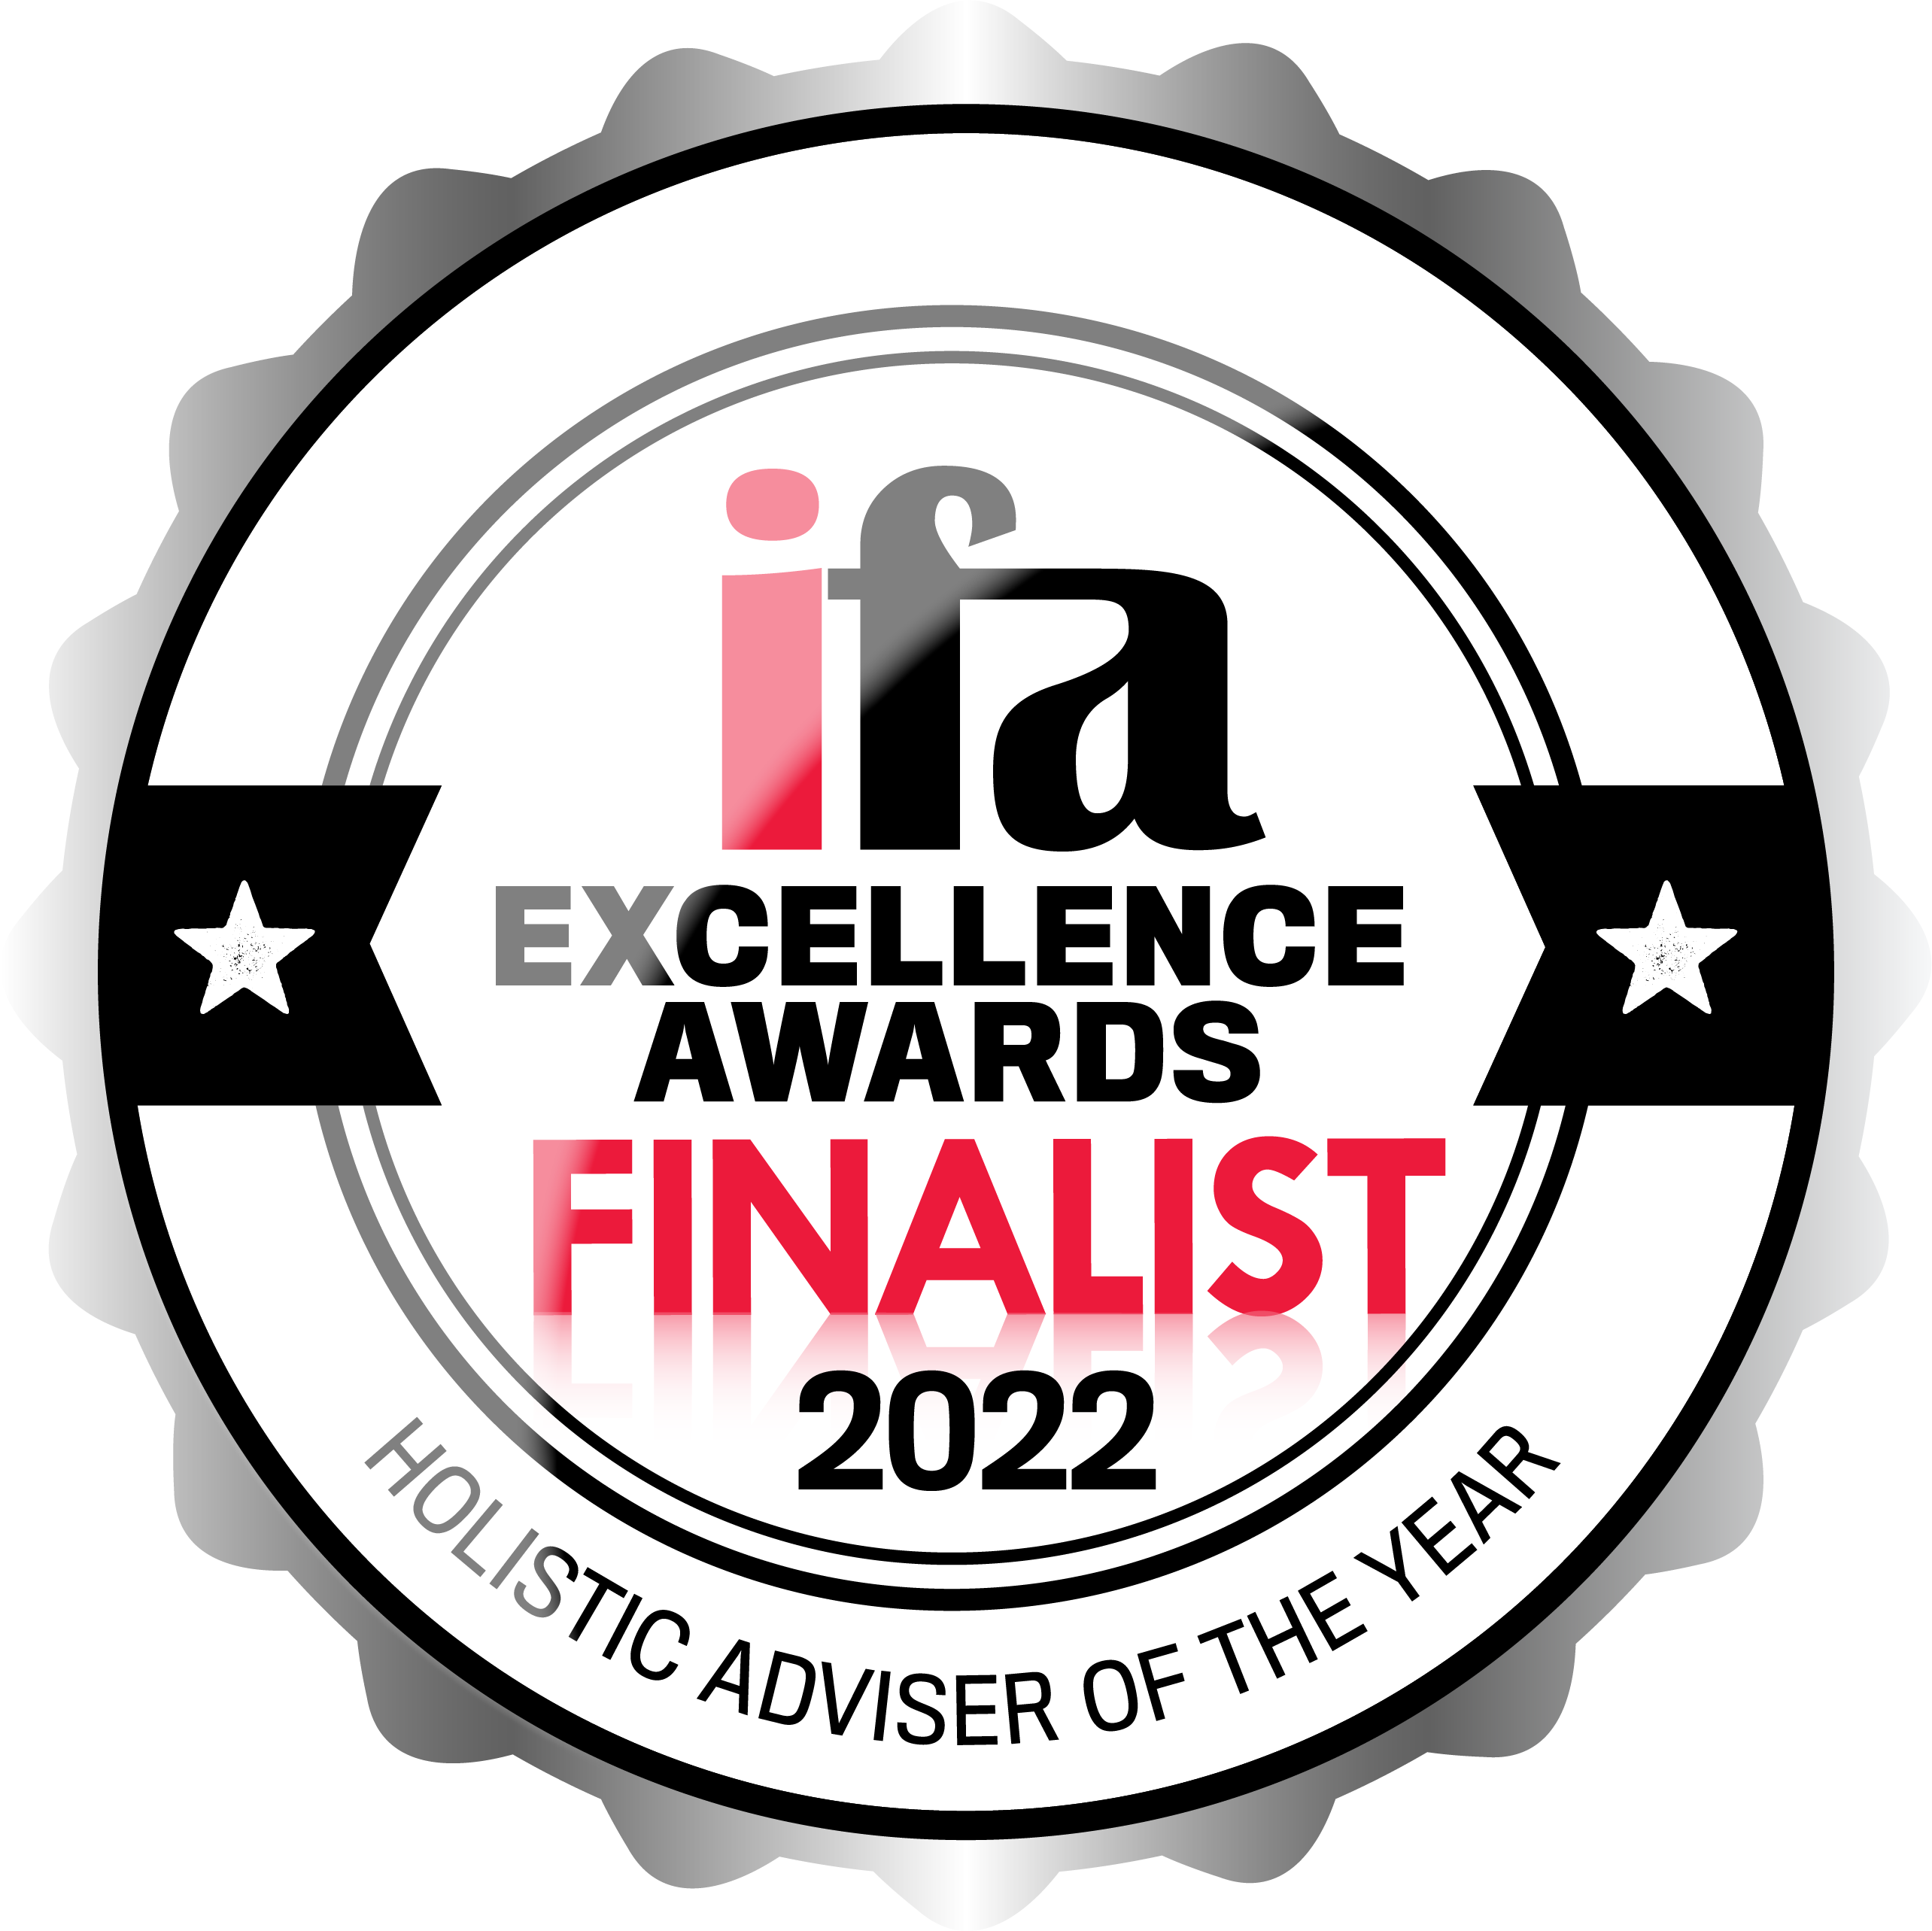 IFA Excellence Awards FINALIST – Holistic Advisor of the Year 2022